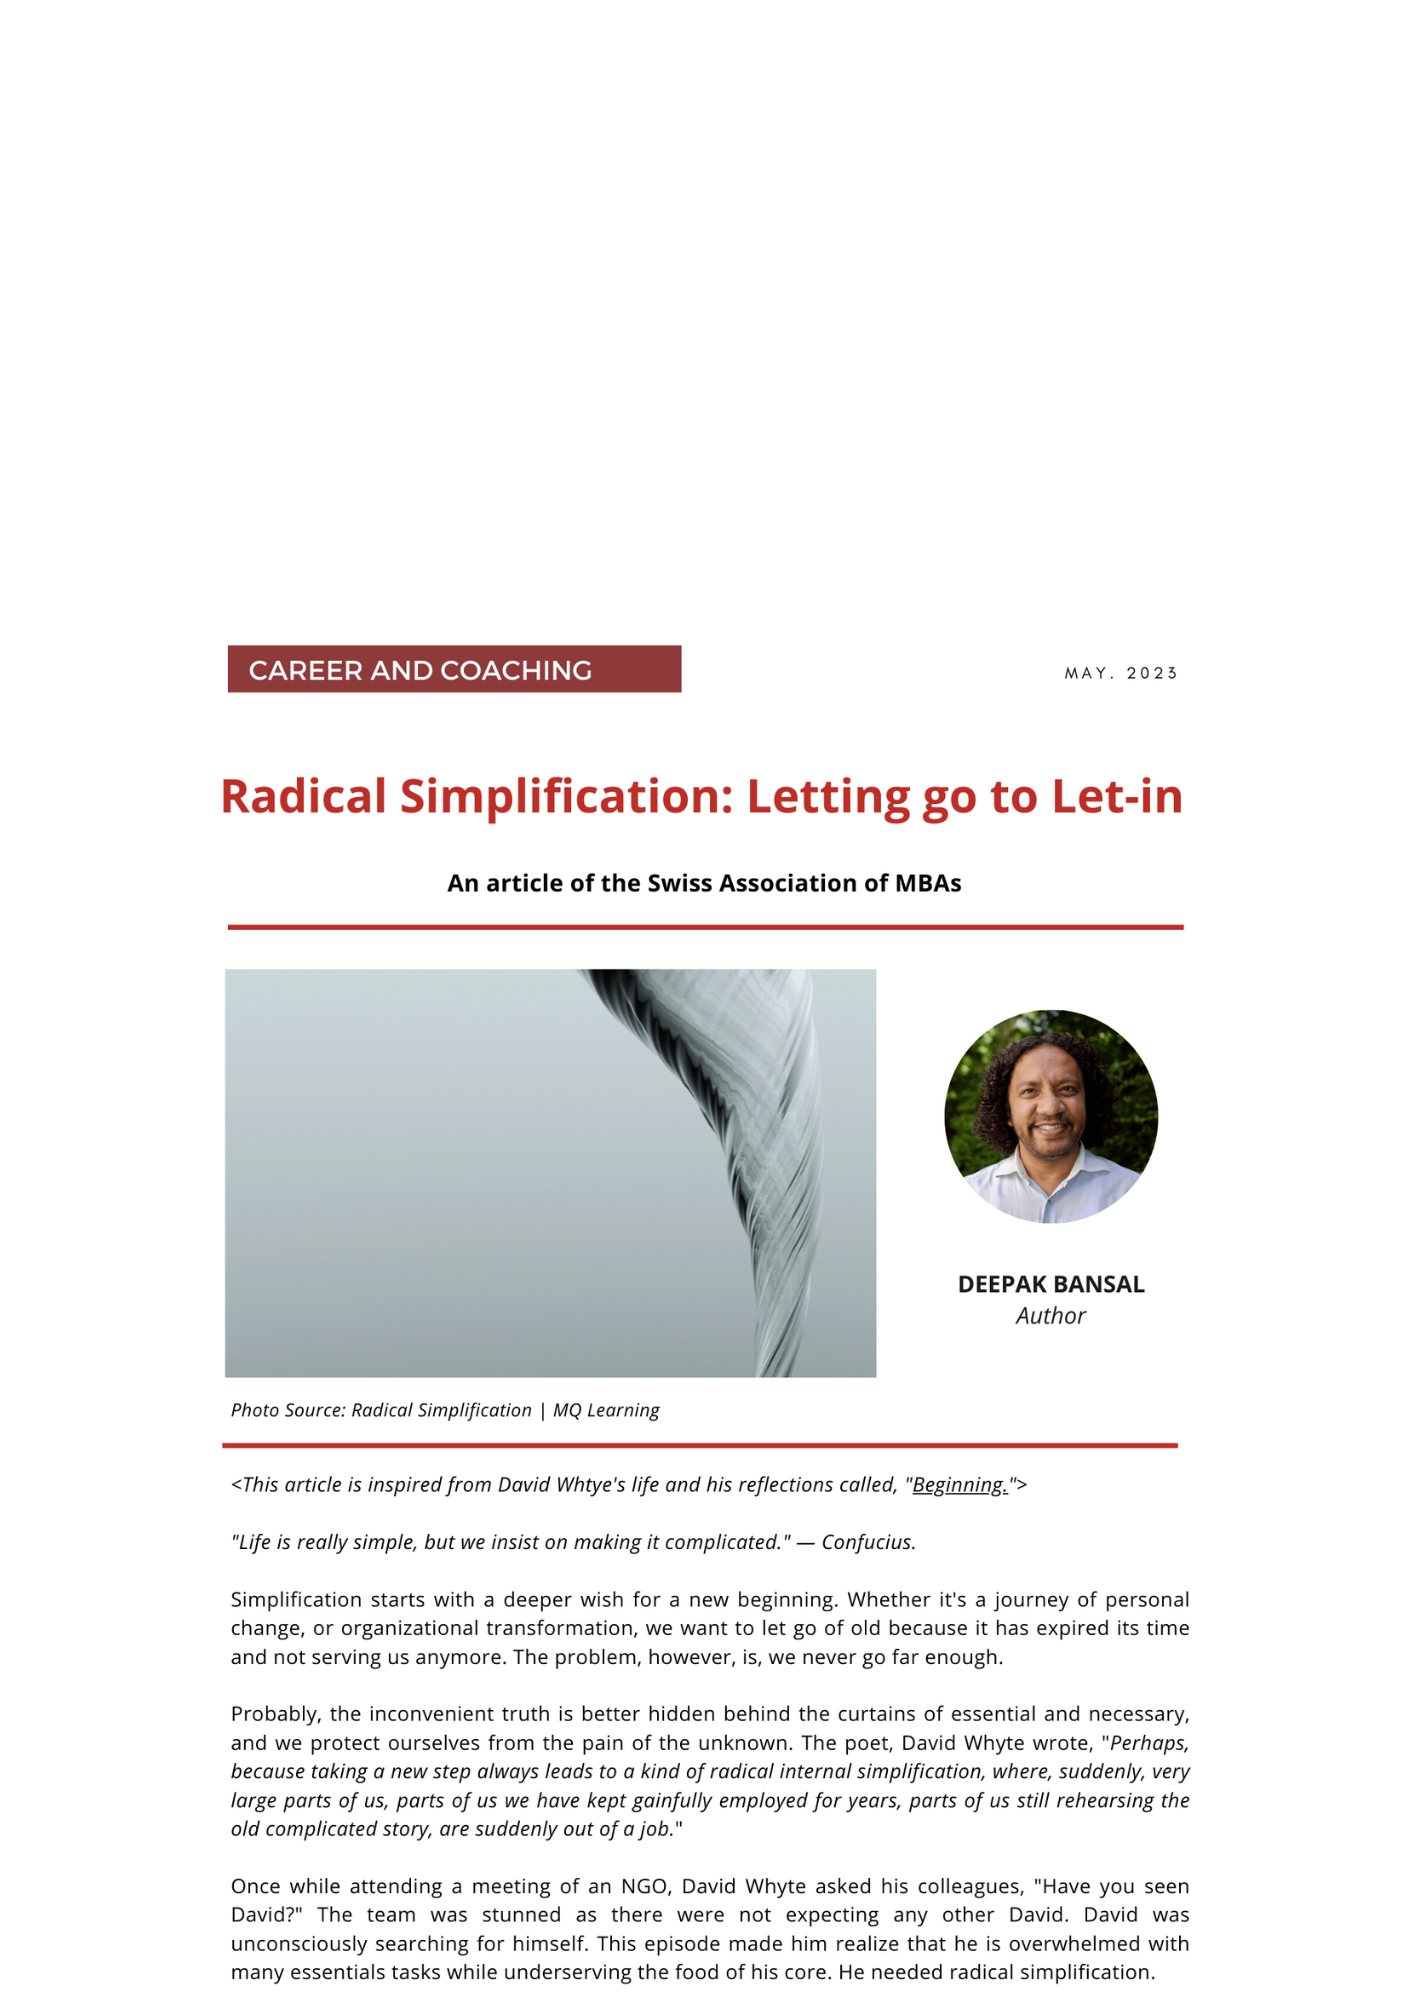 Radical Simplification: Letting go to Let-in